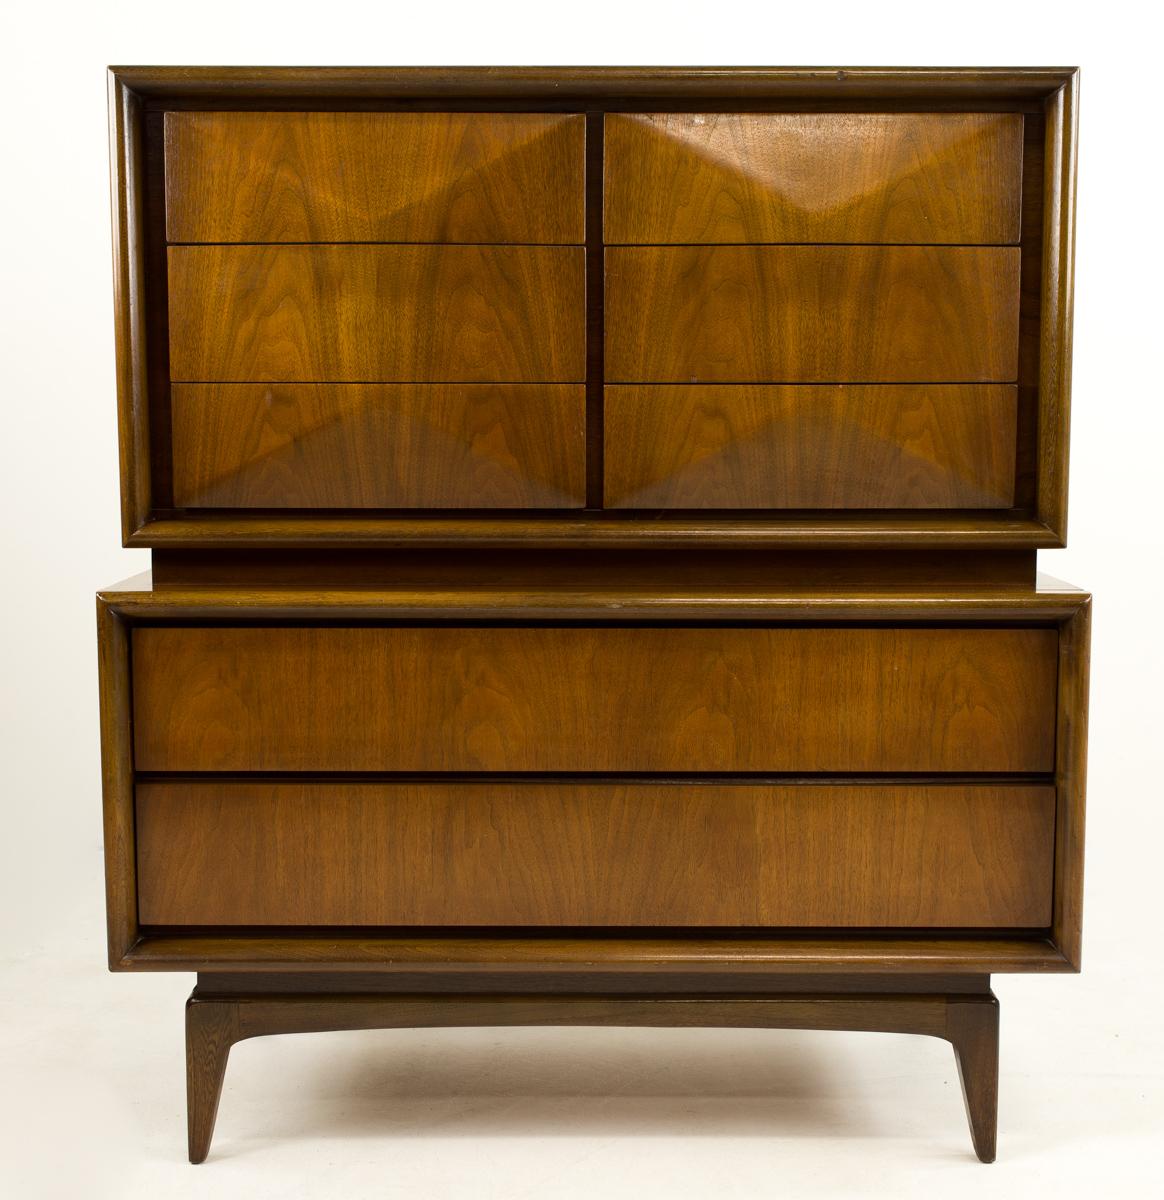 United Furniture mid century diamond highboy dresser

This dresser measures: 44.25 wide x 20 deep x 49.75 inches high

All pieces of furniture can be had in what we call restored vintage condition. That means the piece is restored upon purchase